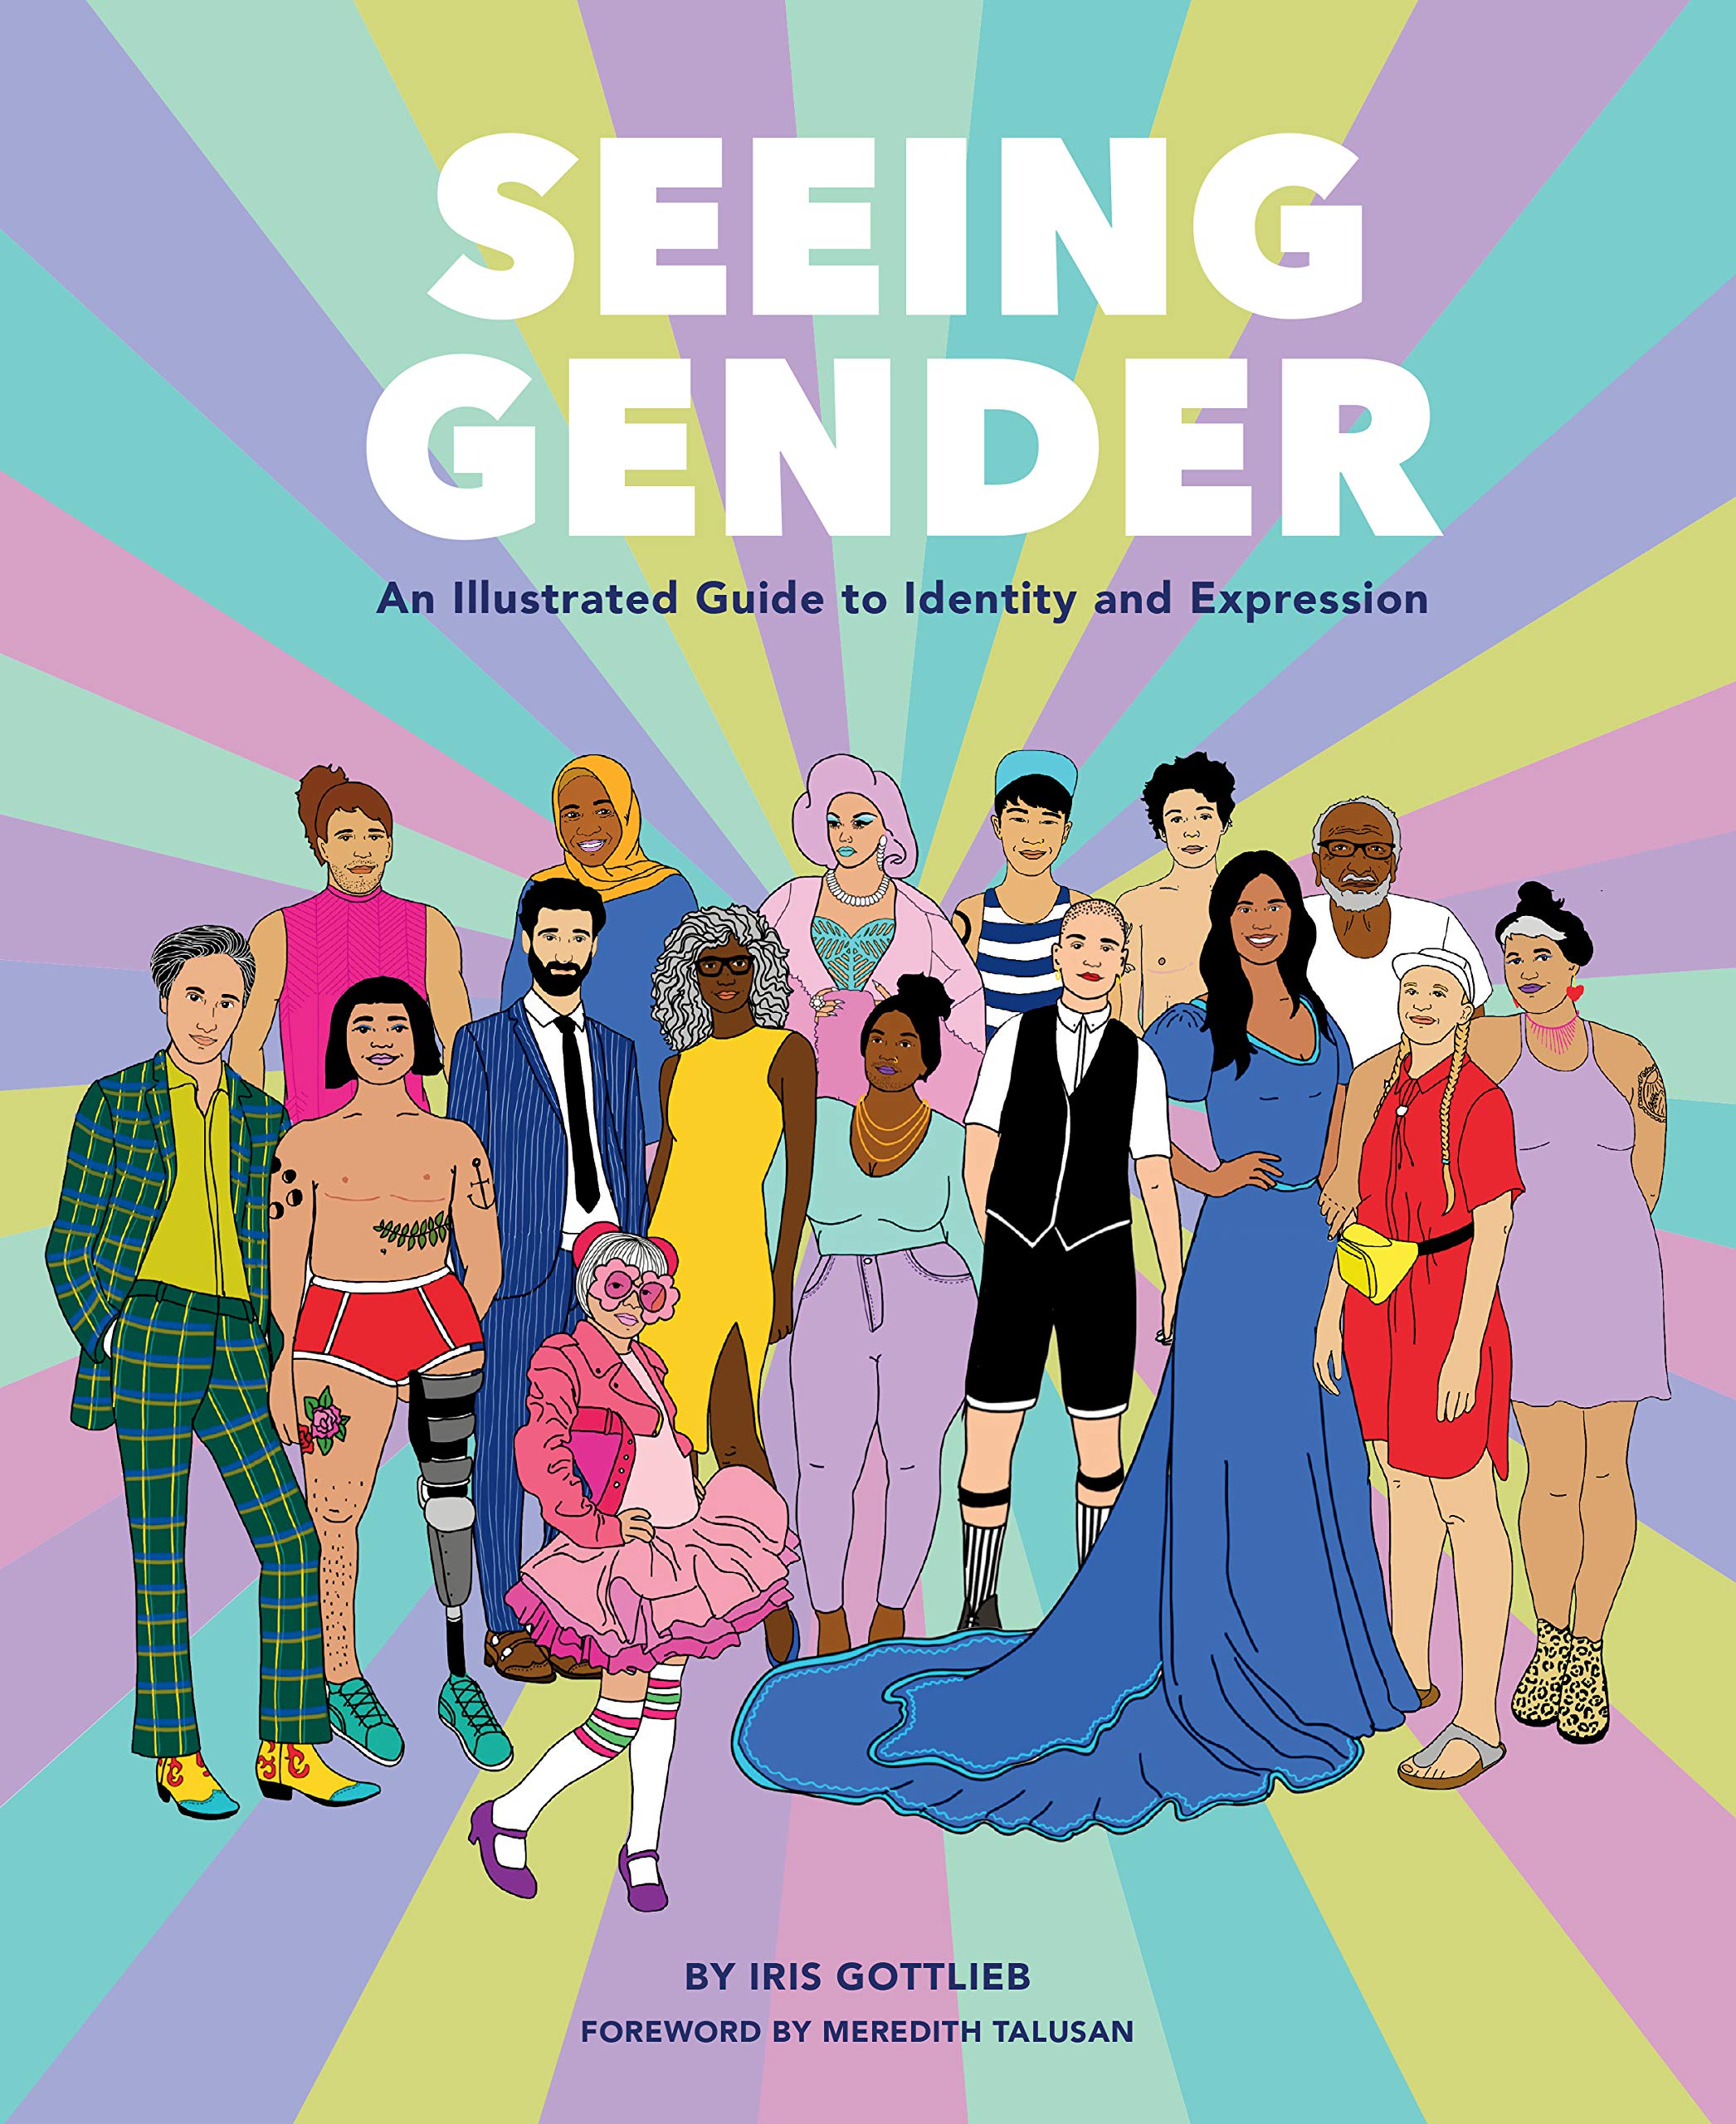 Seeing Gender book cover - illustration of a diverse group of people against a multicolored starburst background